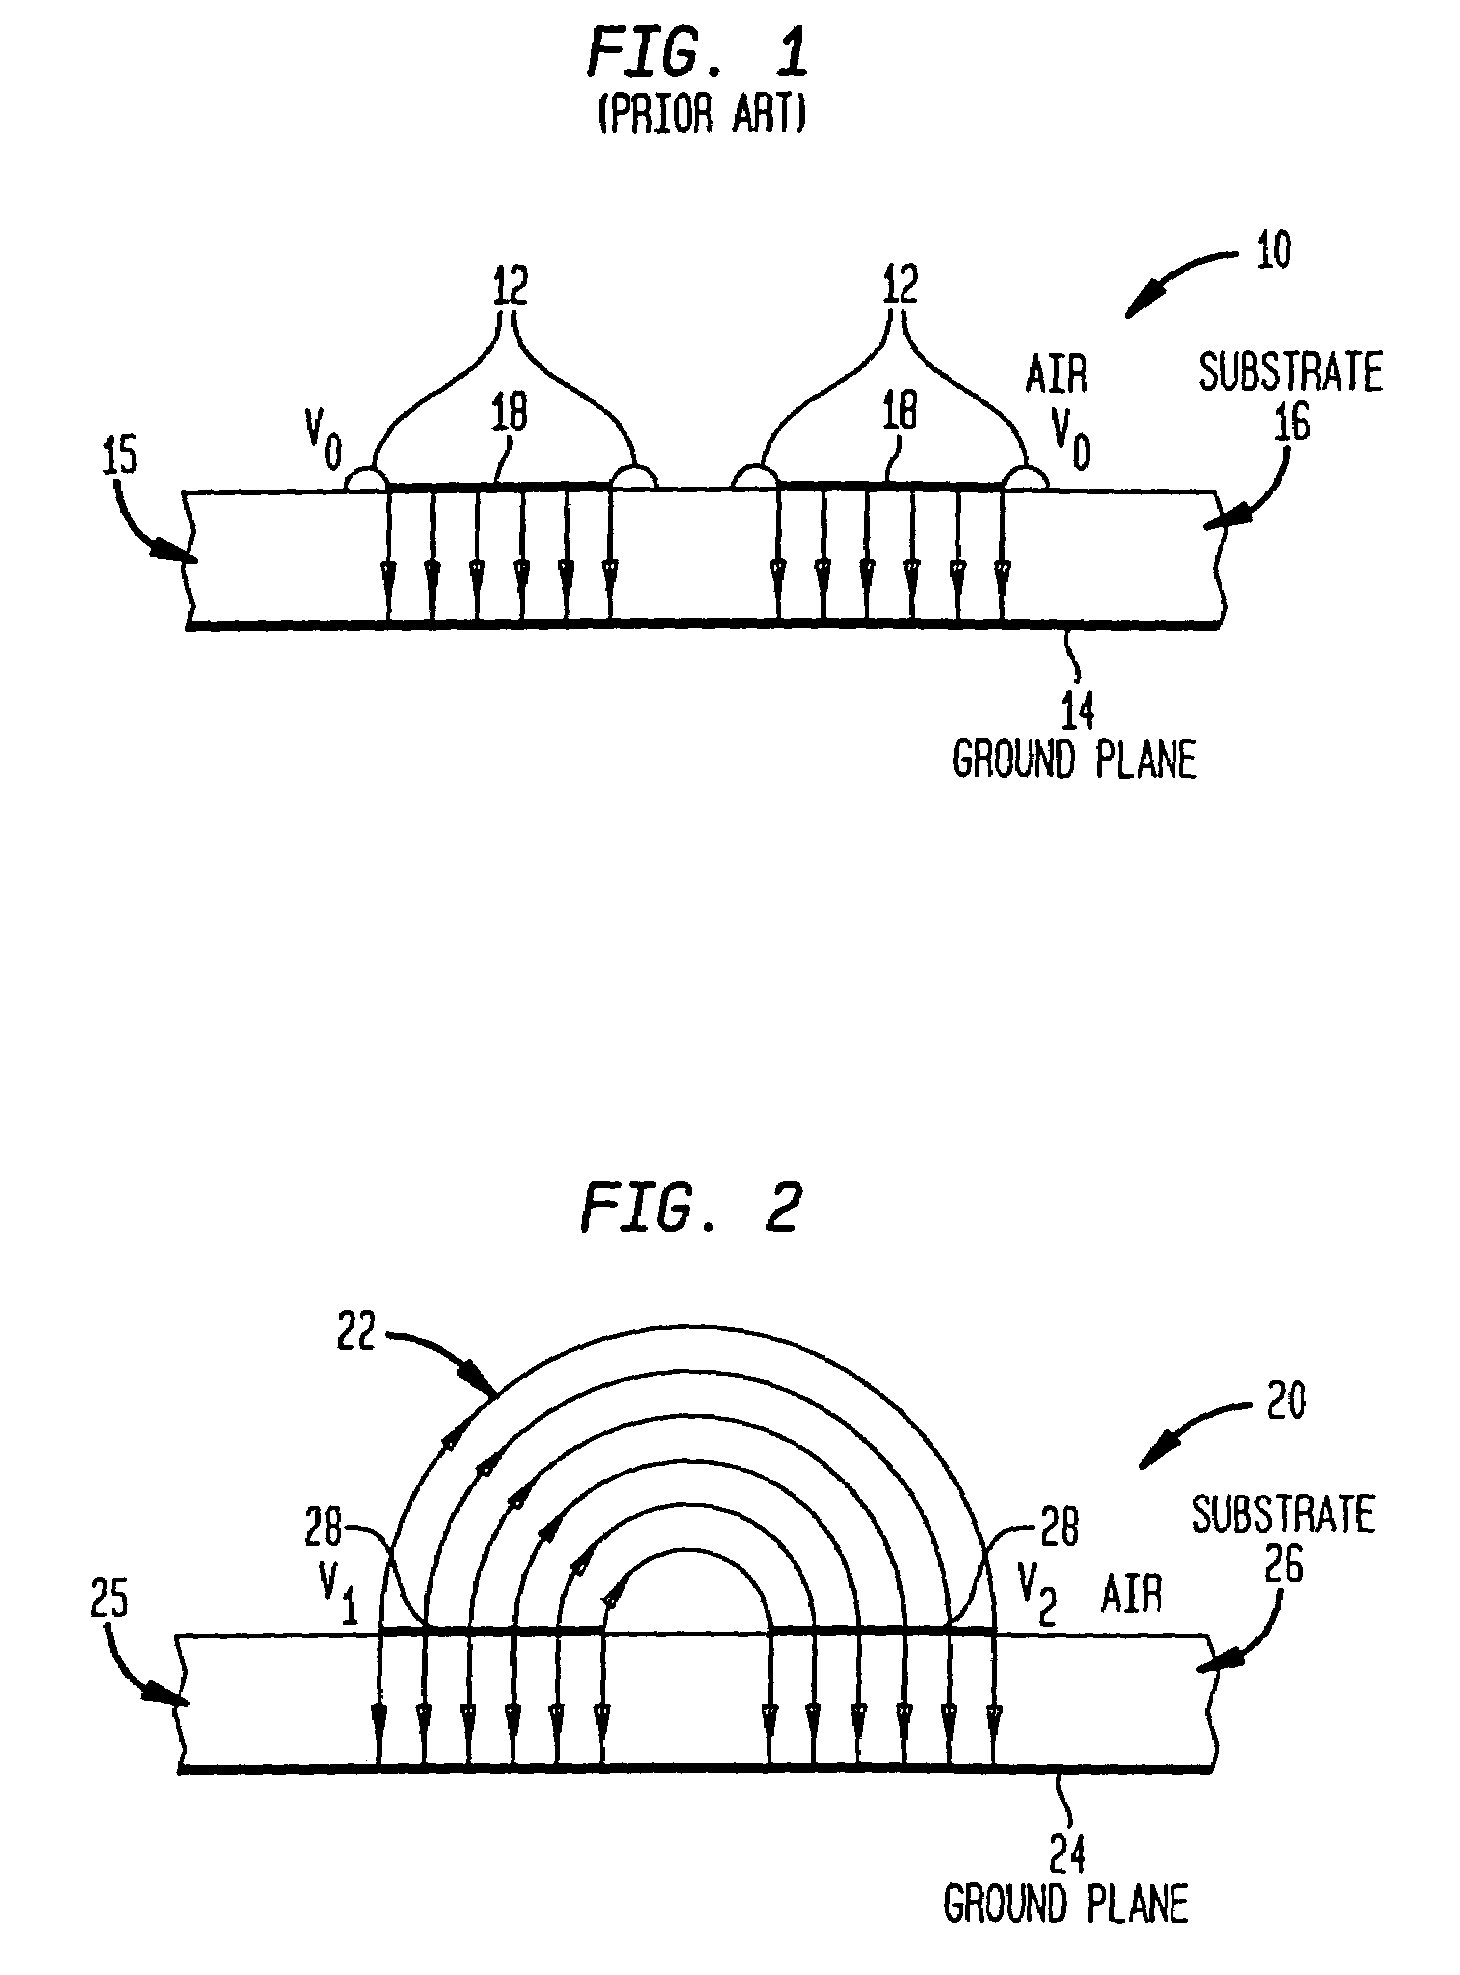 Systems and methods for providing optimized patch antenna excitation for mutually coupled patches